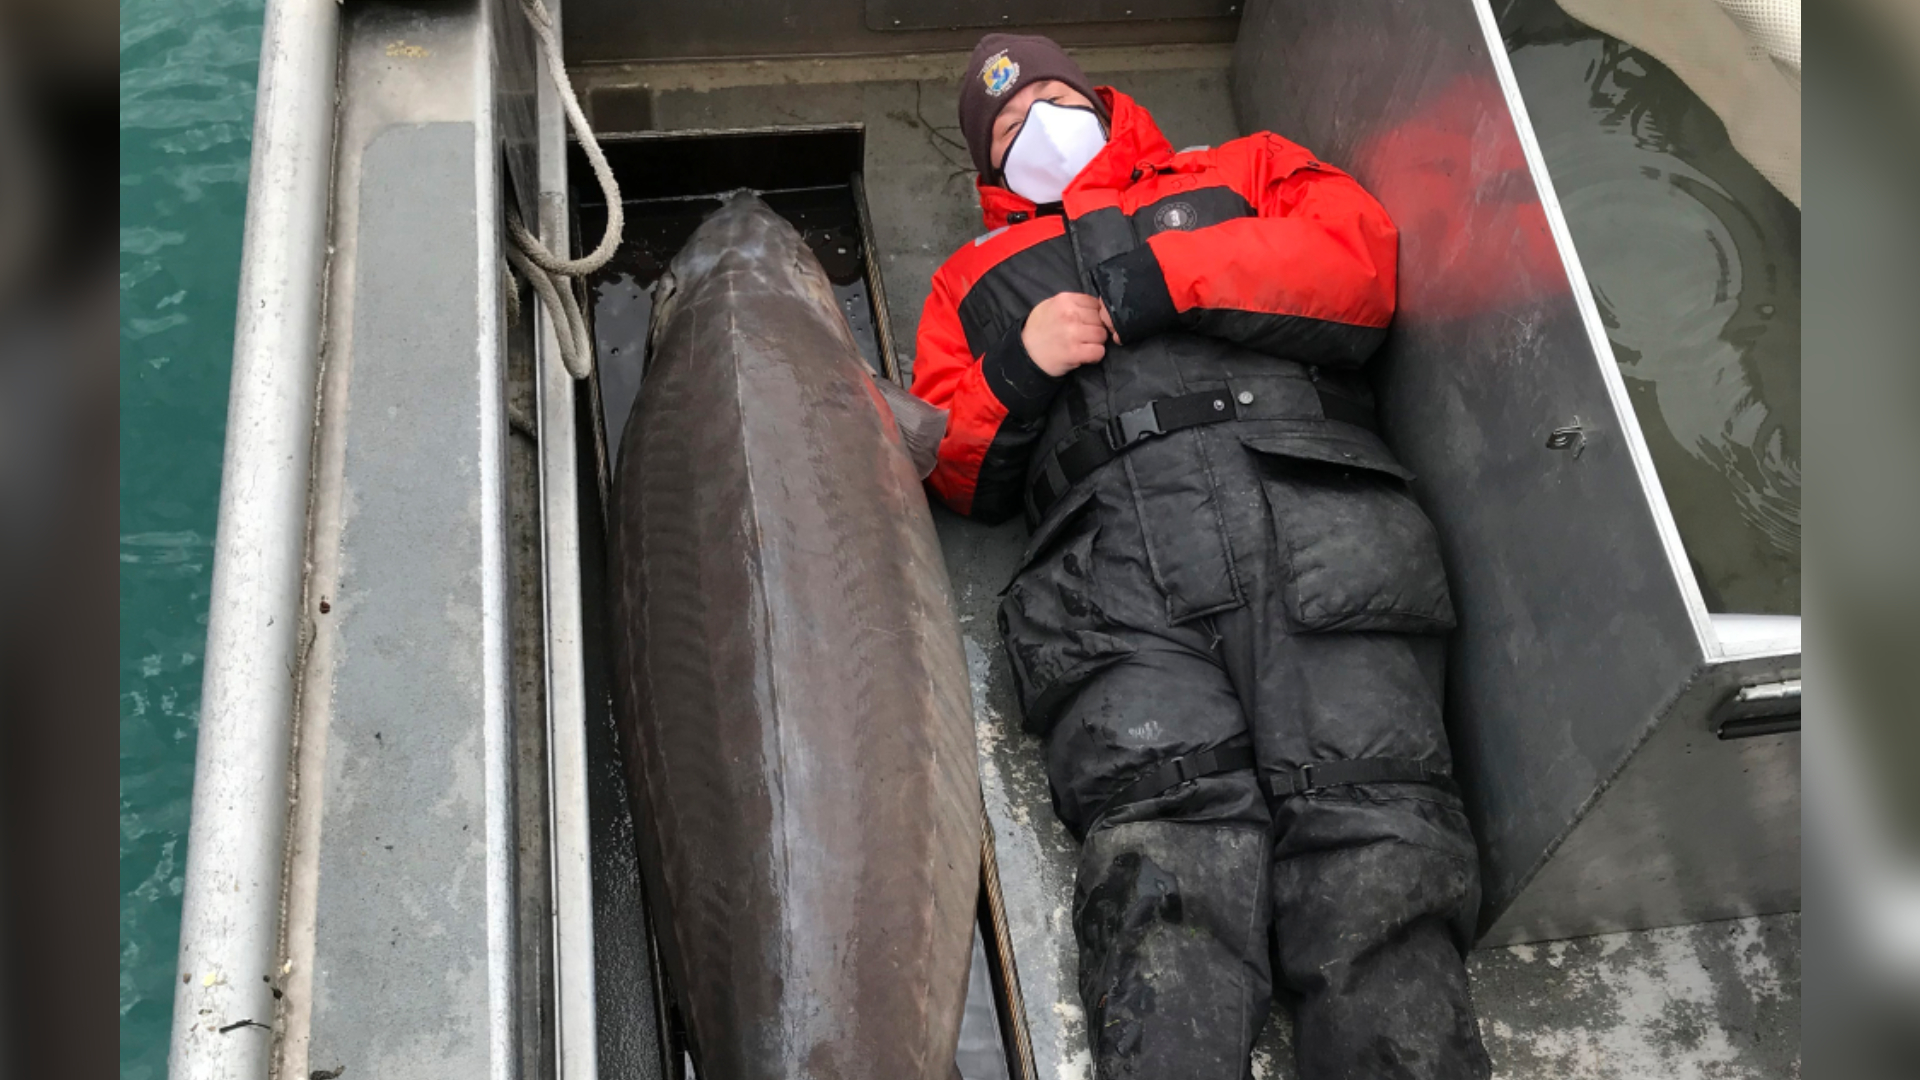 240-Pound Fish, Age 100, Caught in Detroit River